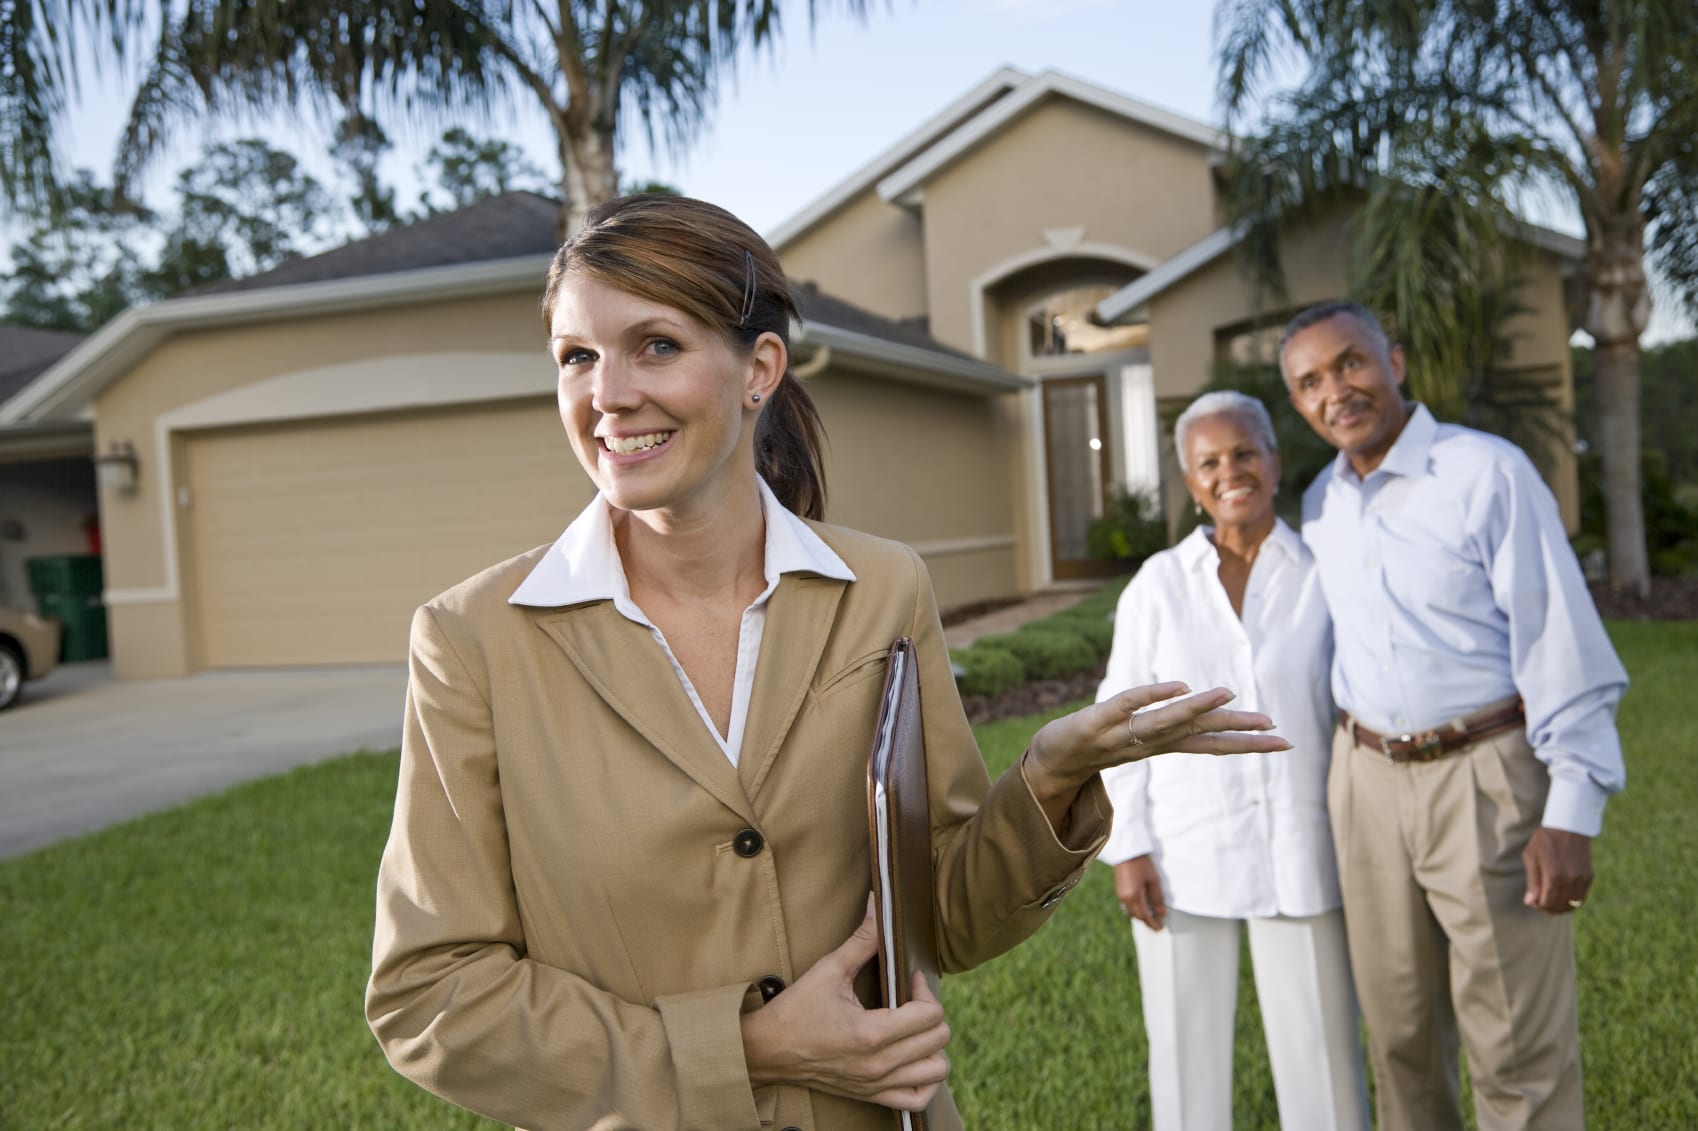 Rental properties are a great source of retirement income